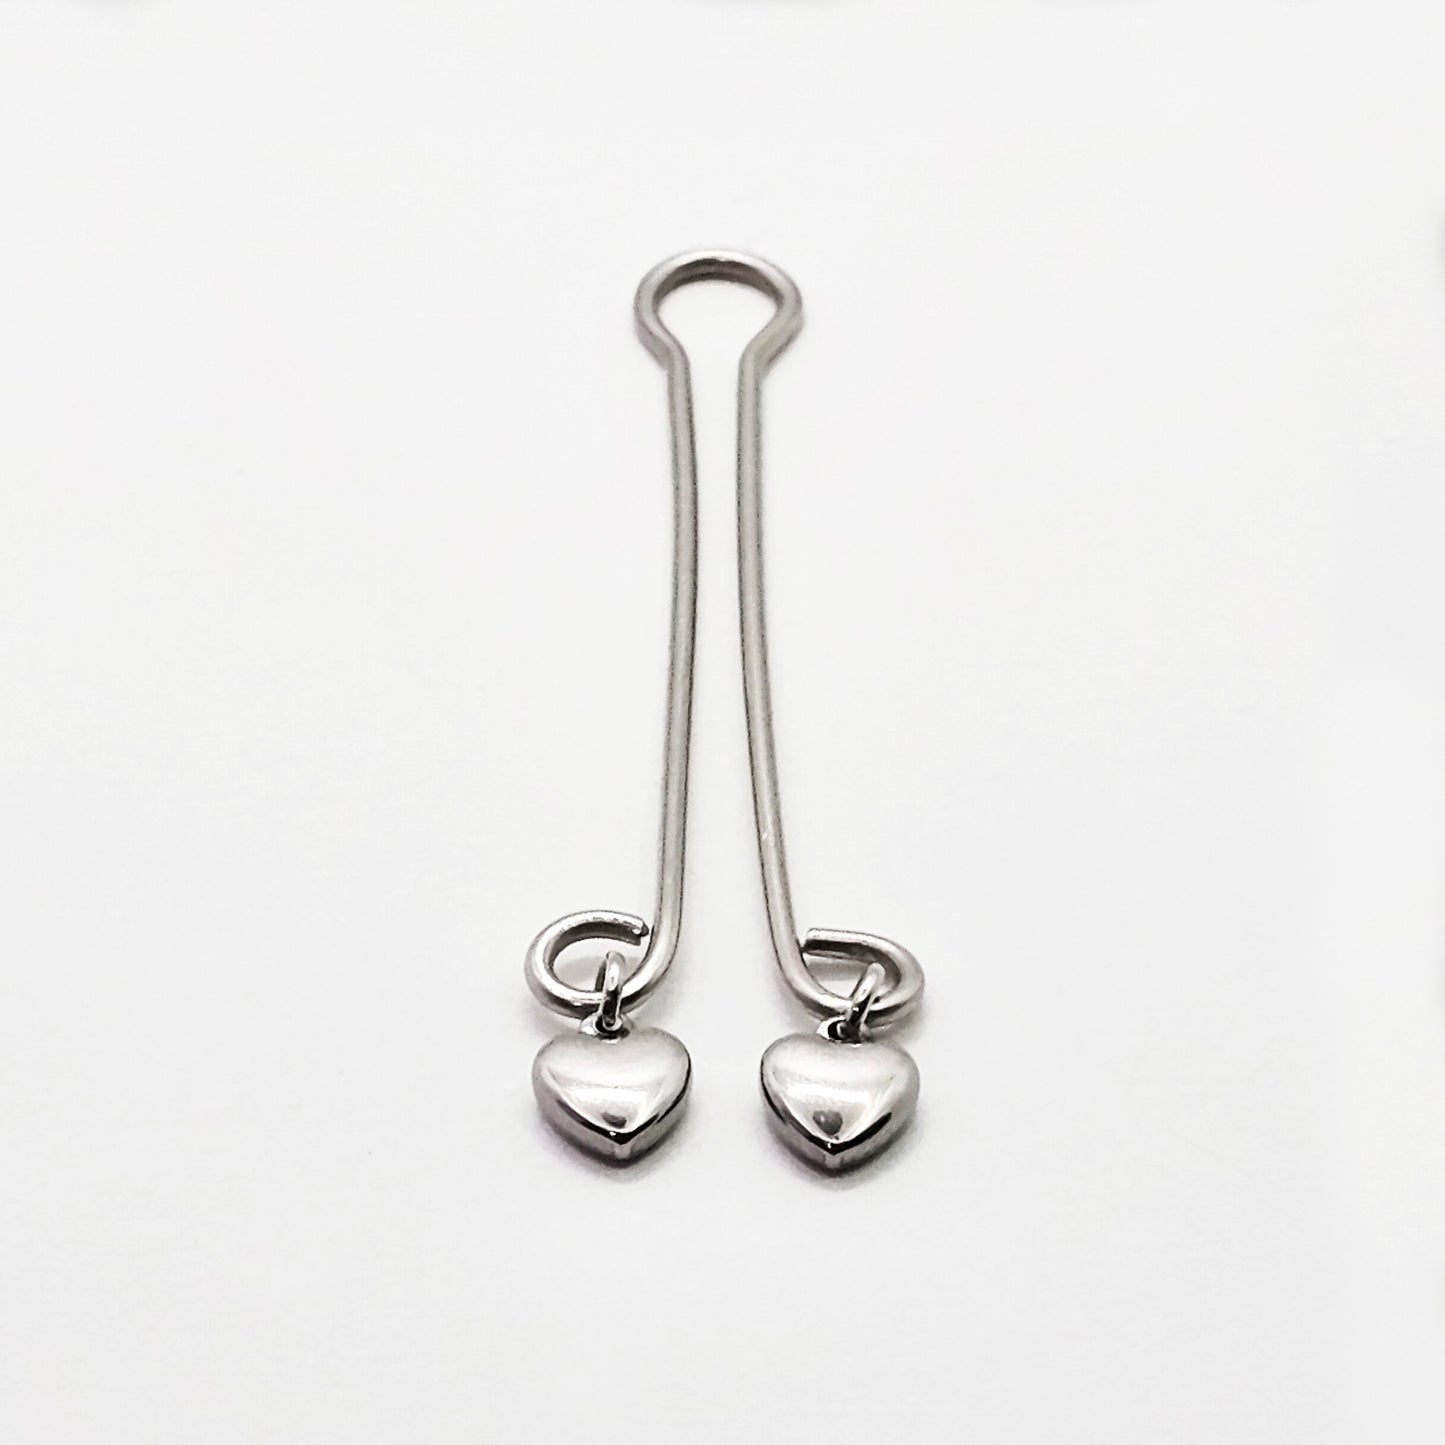 Labia Clip with Hearts, Stainless Steel. Non Piercing Clit Clip Vaginal Jewelry.